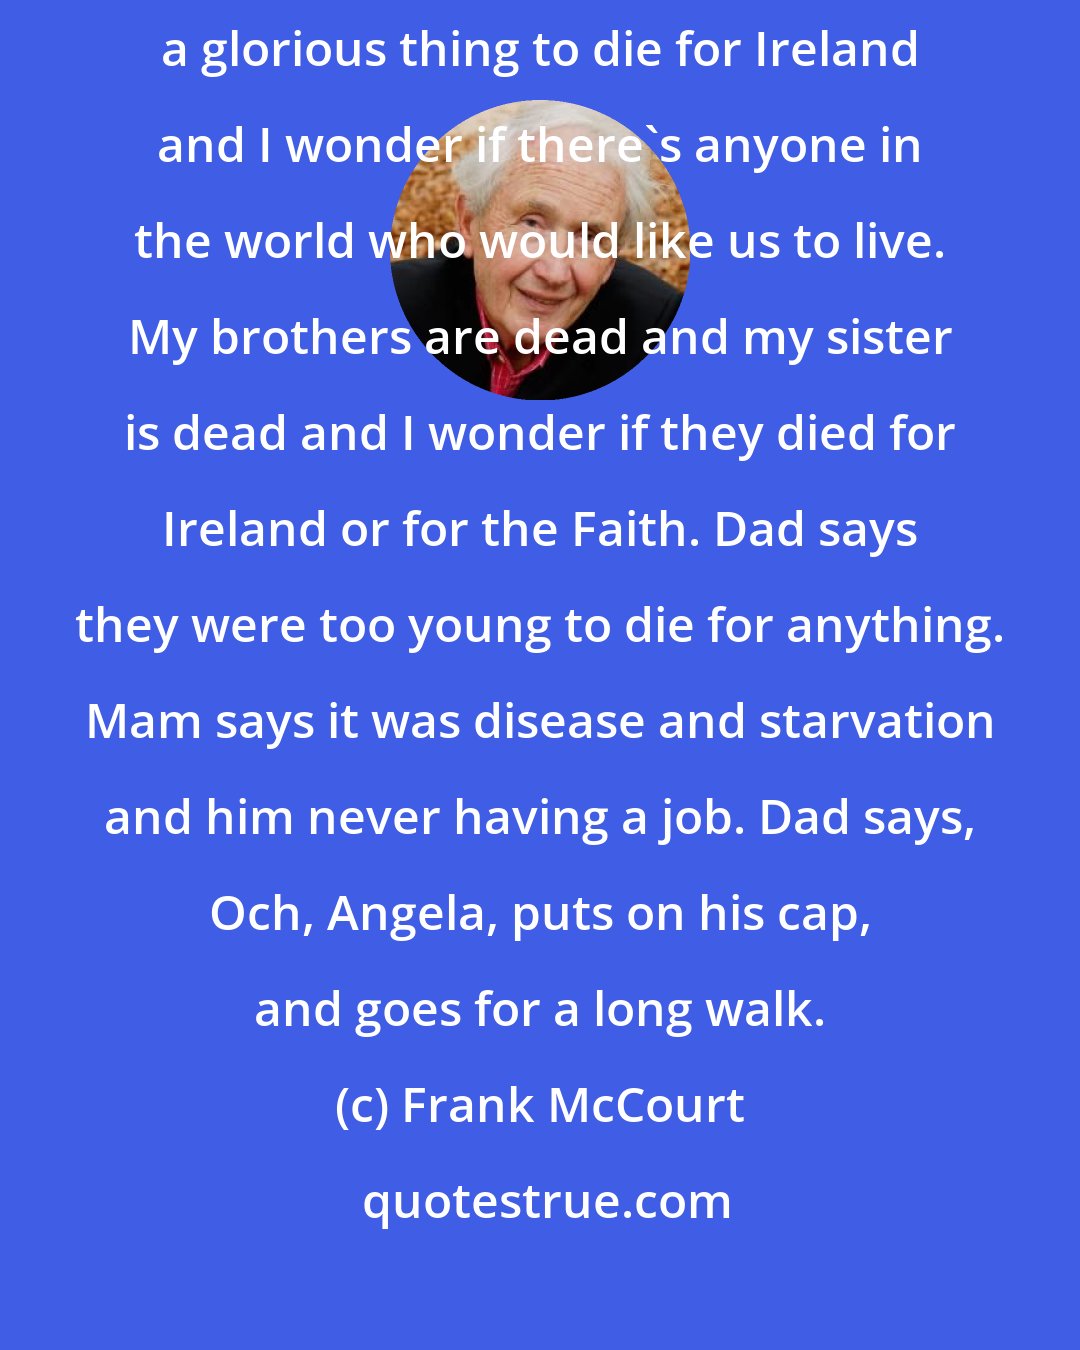 Frank McCourt: The master says it's a glorious thing to die for the Faith and Dad says it's a glorious thing to die for Ireland and I wonder if there's anyone in the world who would like us to live. My brothers are dead and my sister is dead and I wonder if they died for Ireland or for the Faith. Dad says they were too young to die for anything. Mam says it was disease and starvation and him never having a job. Dad says, Och, Angela, puts on his cap, and goes for a long walk.